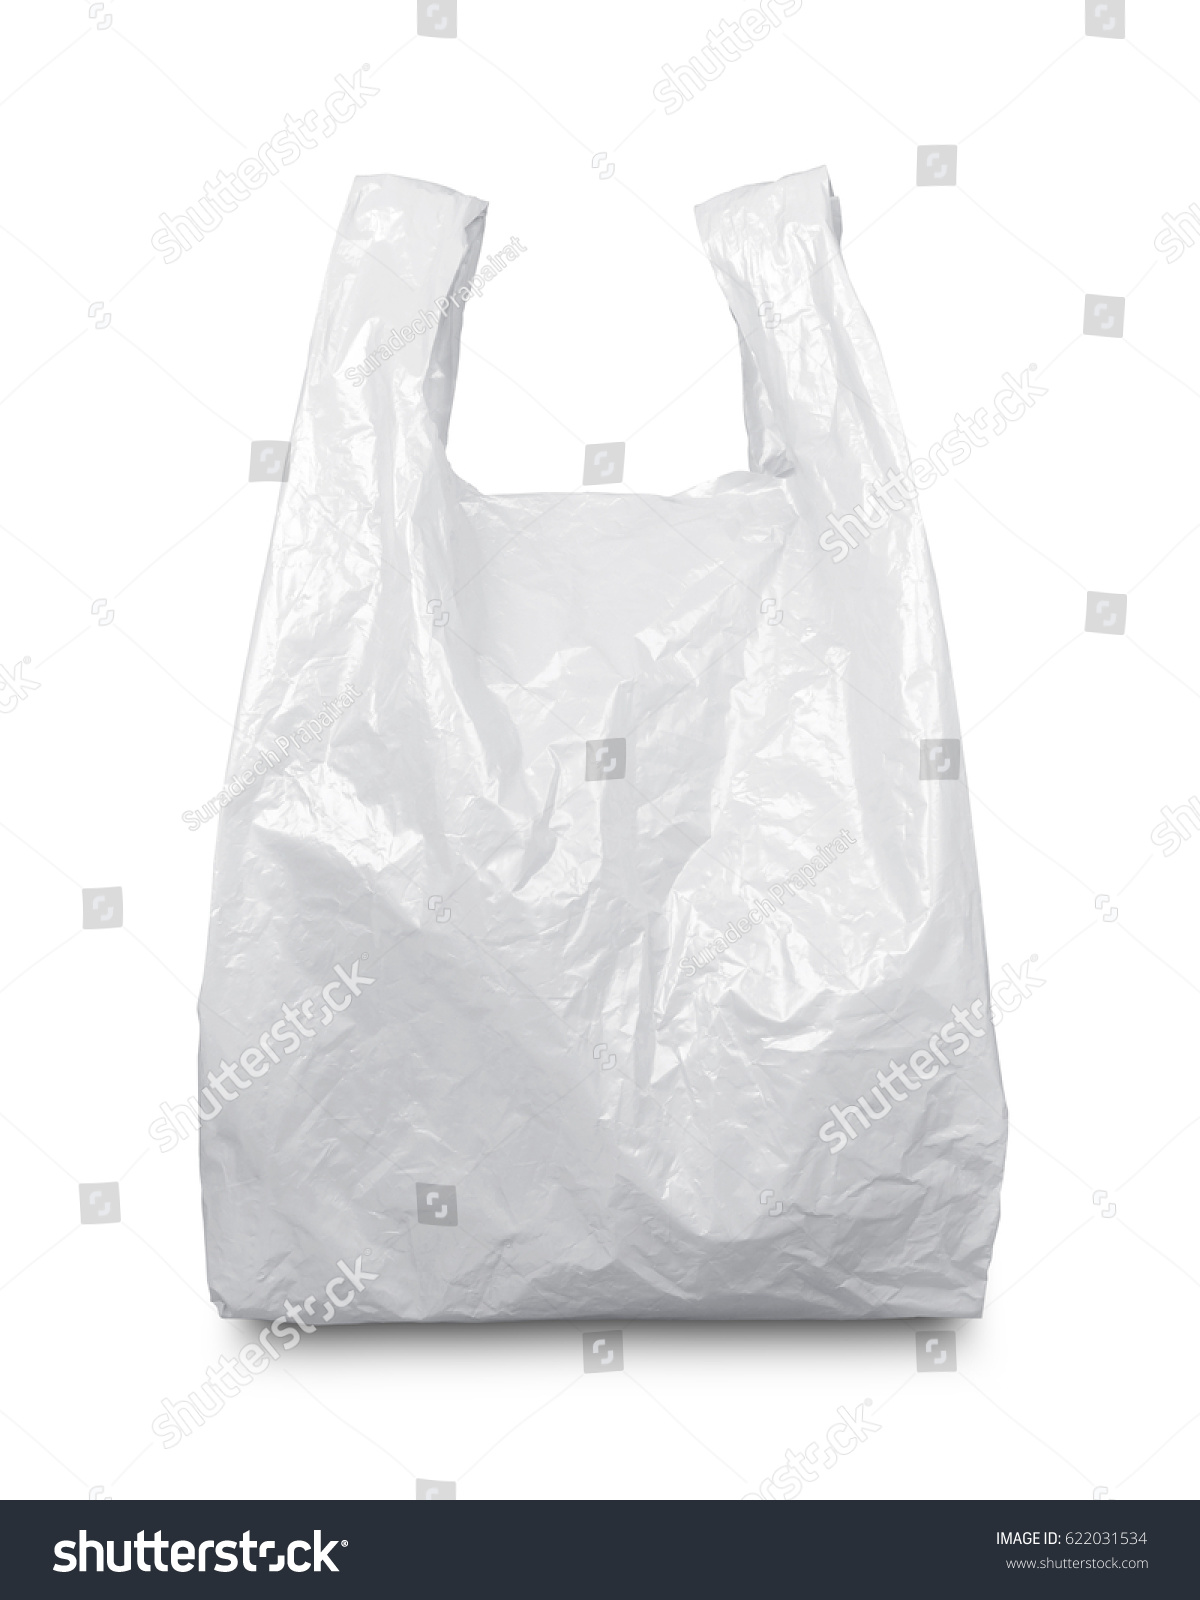 White plastic bag isolated on white with clipping path #622031534